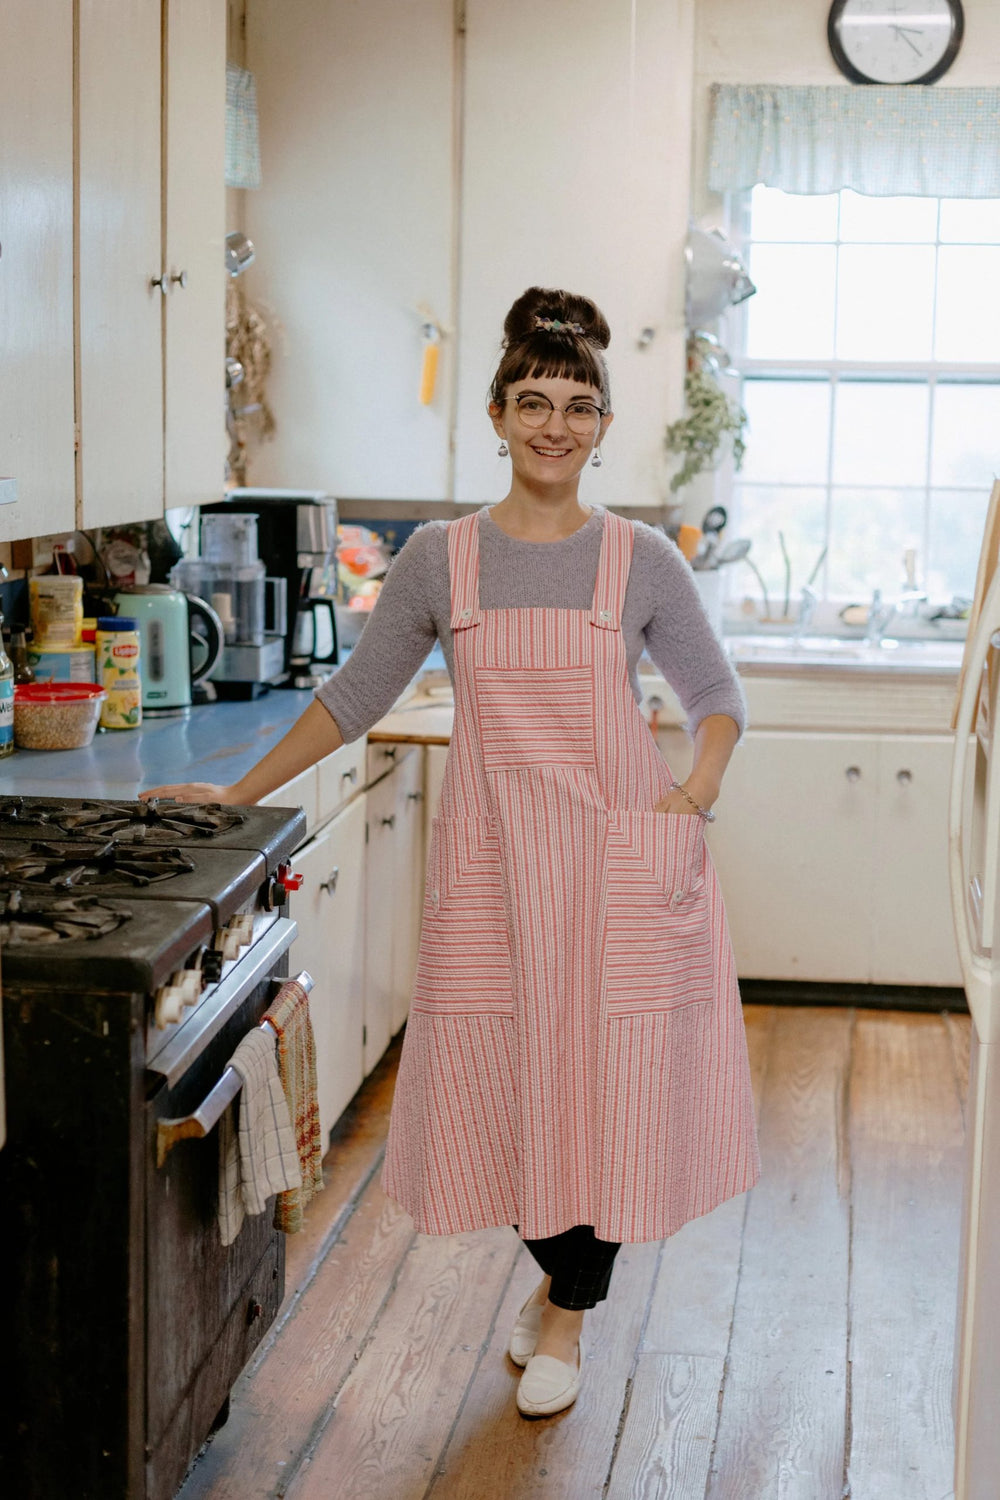 Woman wearing the Cynthia's Cookie Apron sewing pattern from Folkwear on The Fold Line. An Apron pattern made in cotton or linen fabrics, featuring straps that cross over at the back and button at the bib, bib pocket, two oversized patch pockets and A-lin